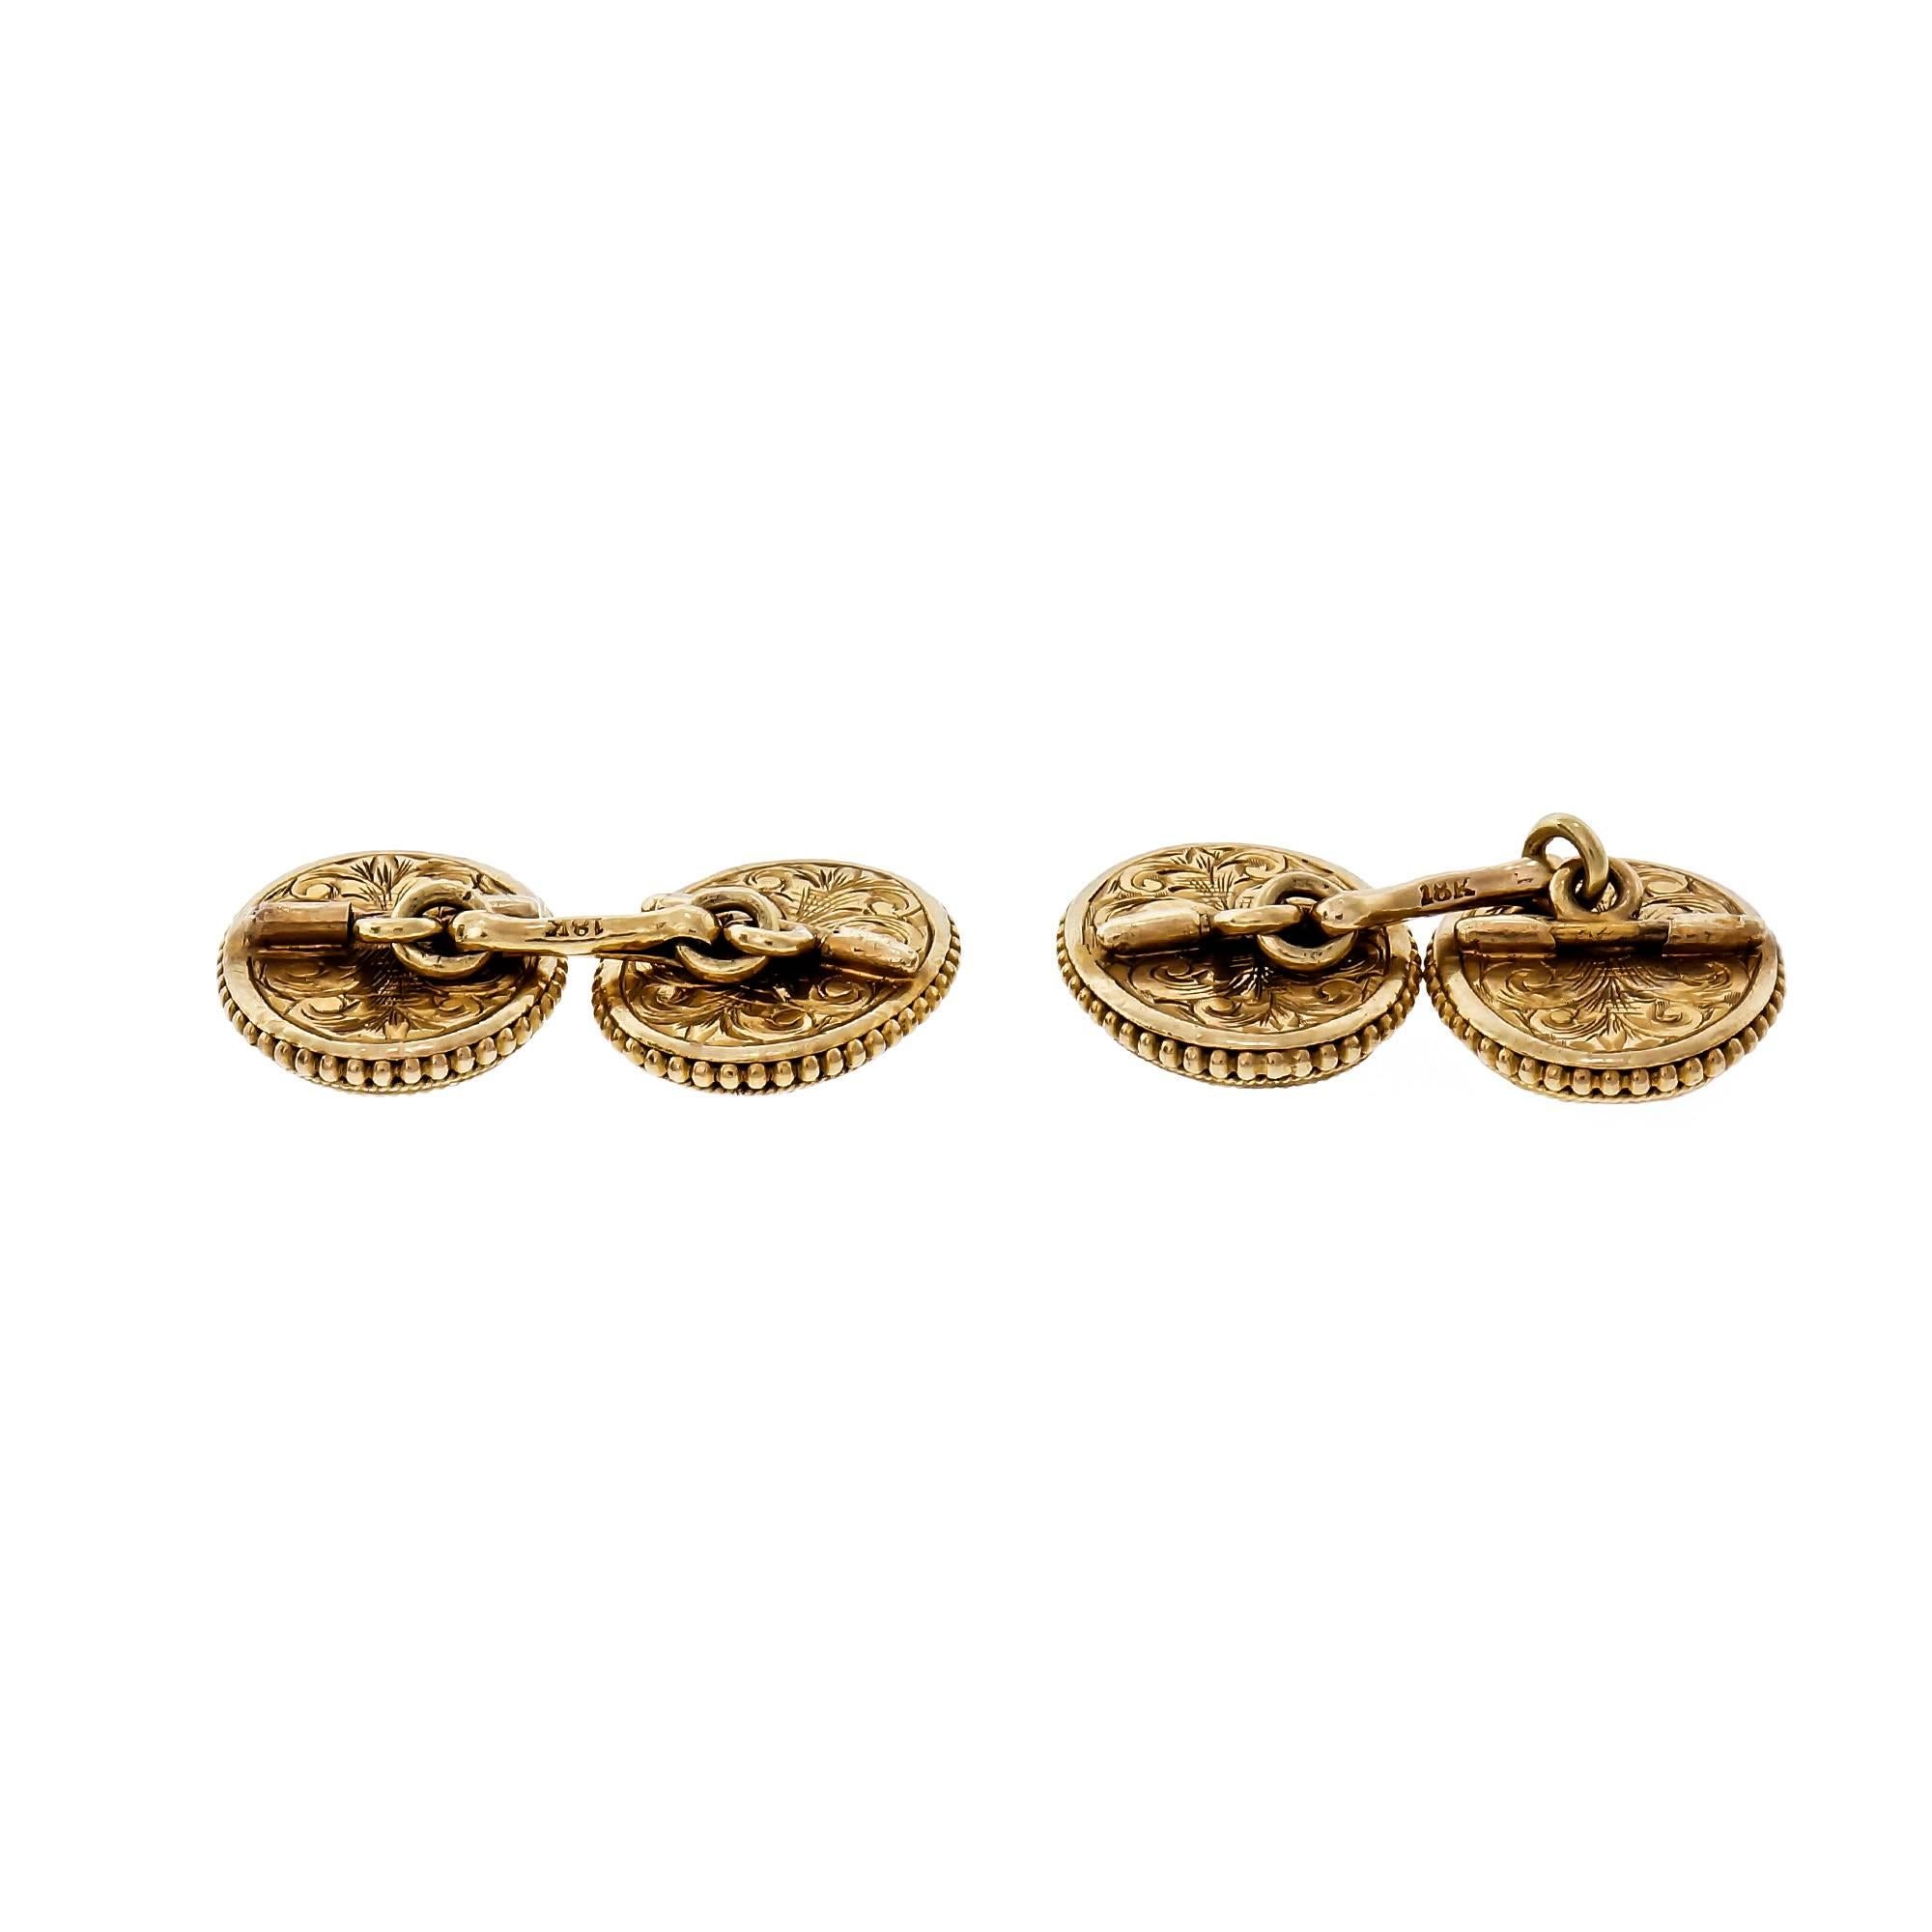 Etruscan Revival Engraved Double Sided Cufflinks For Sale 1